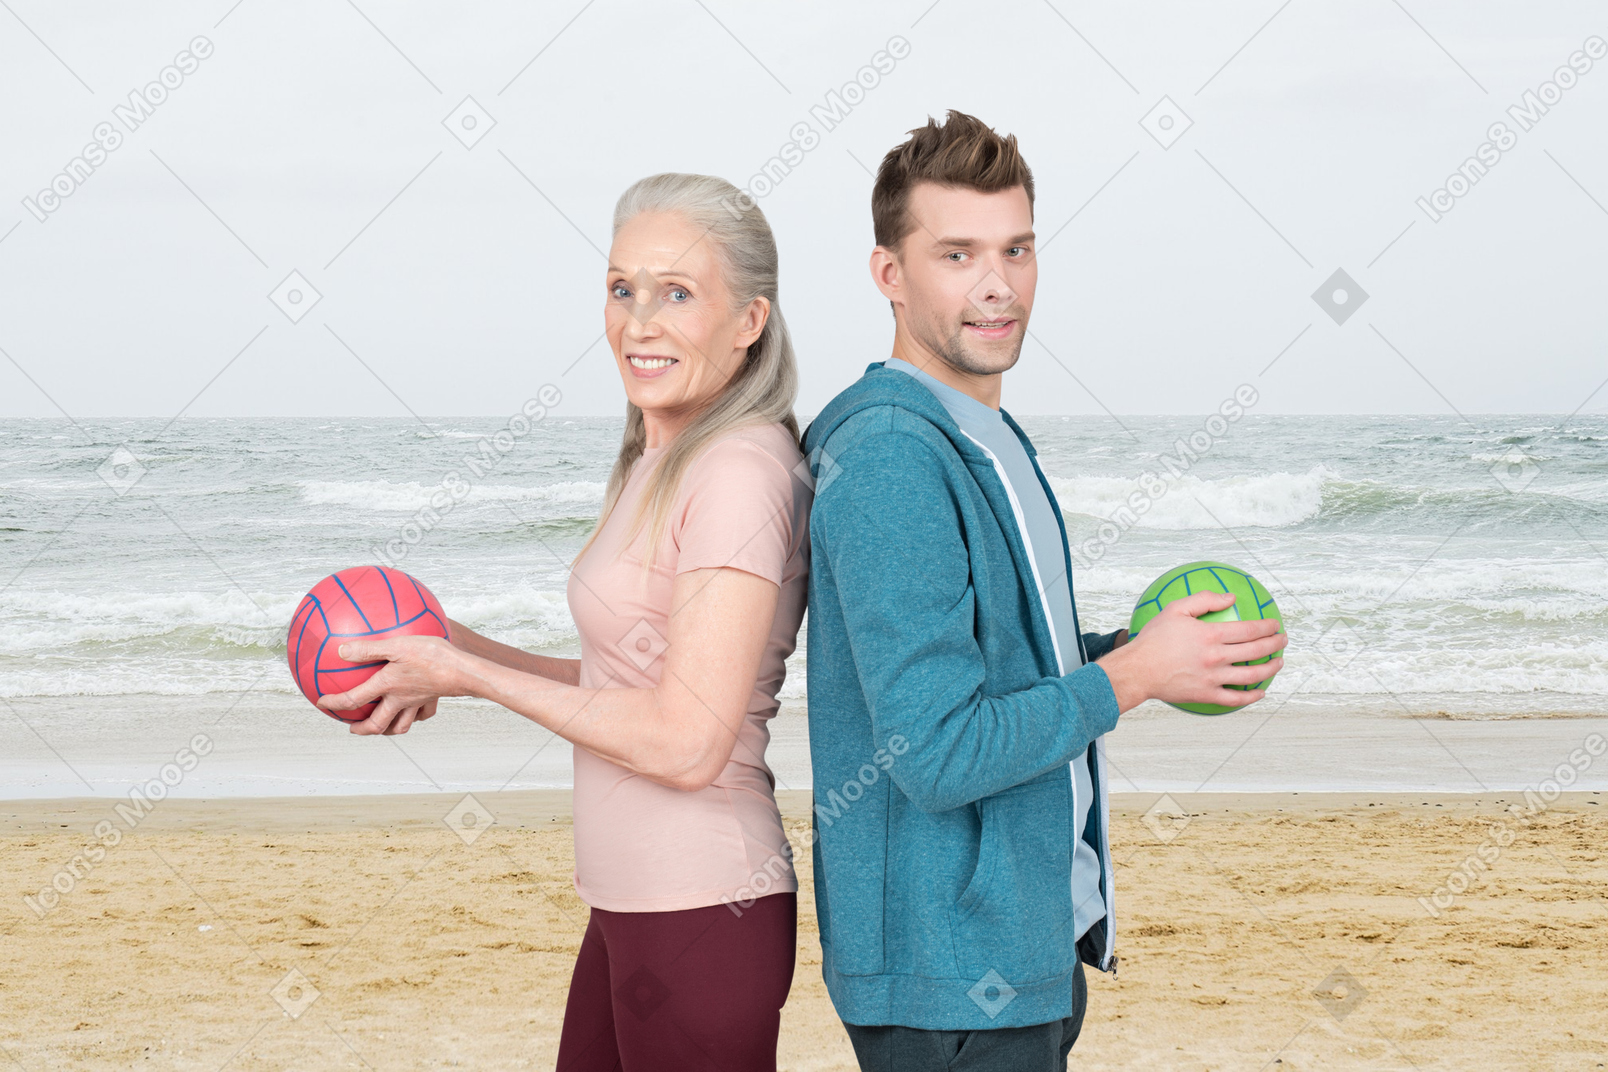 A man and a woman holding volleyball balls on the beach